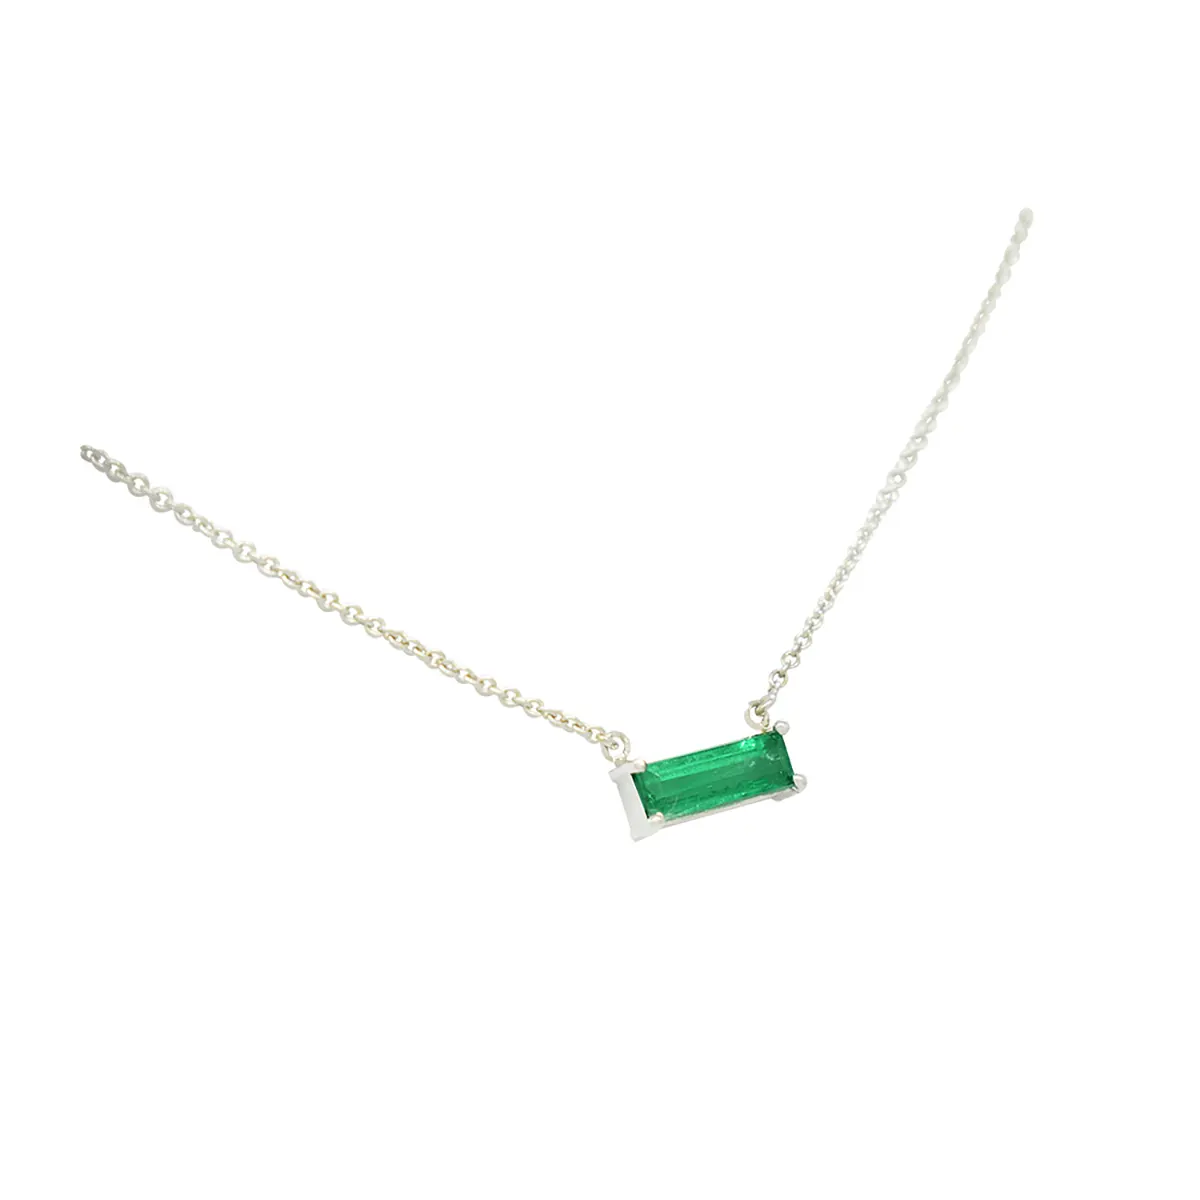 18k-white-gold-solitaire-emerald-necklace-with-baguette-cut-natural-colombian-emerald